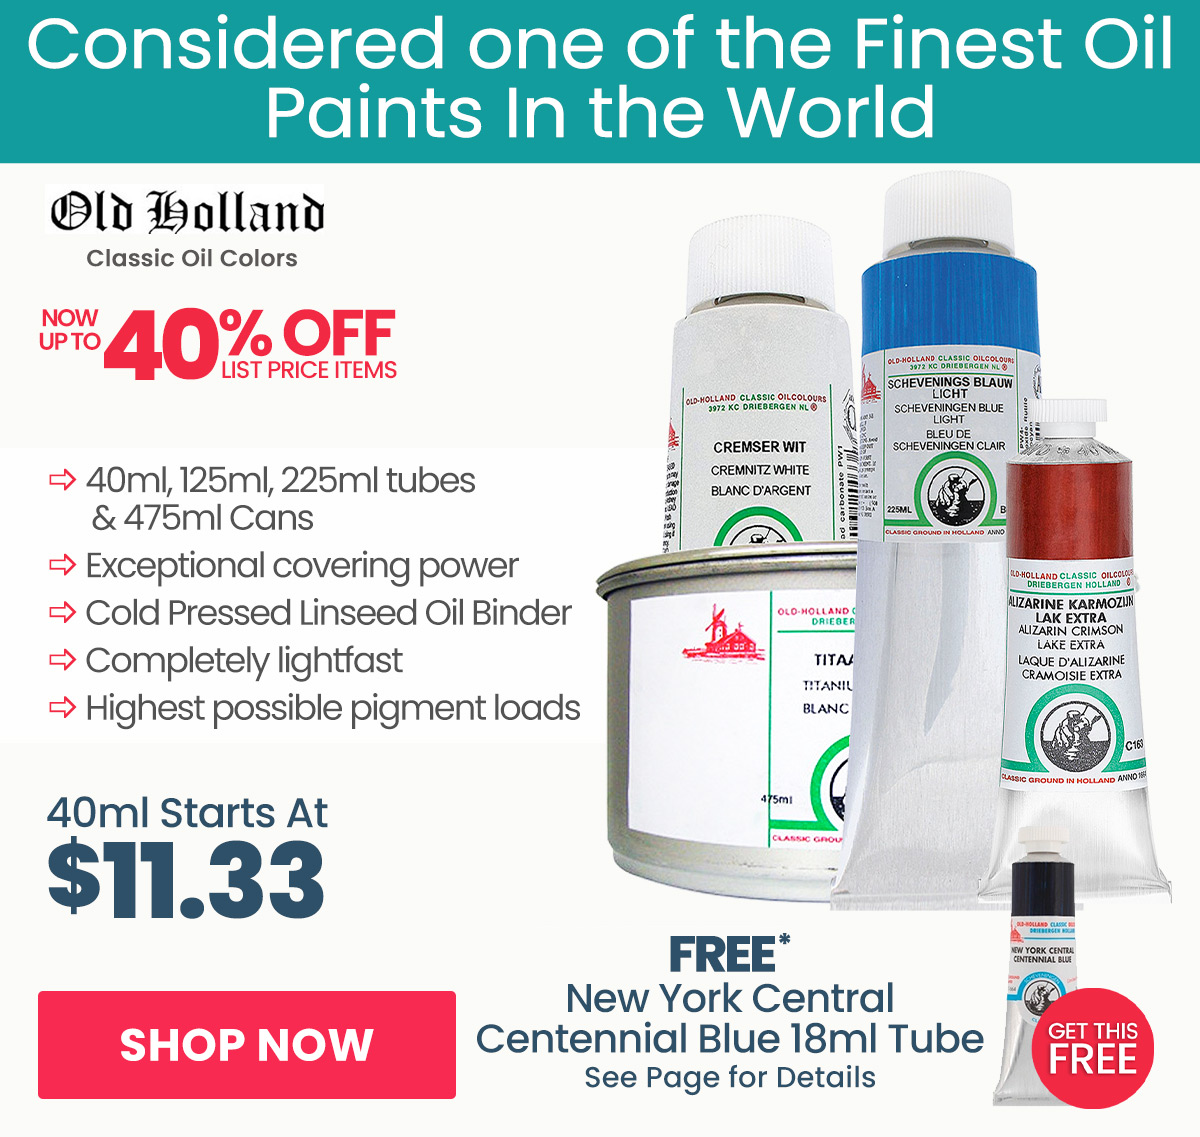 Old Holland Classic Oil Colors - Free Centennial Blue